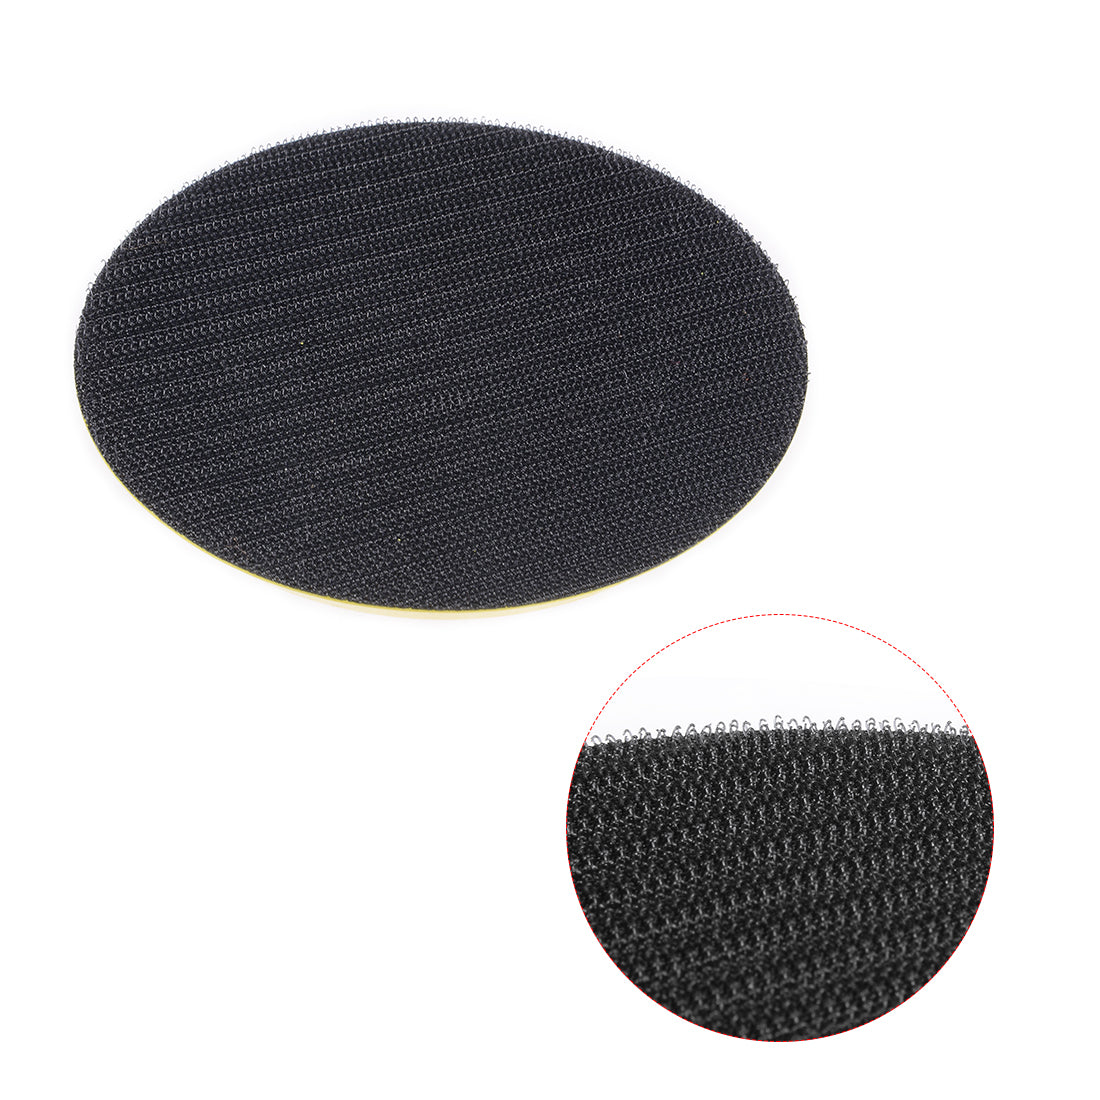 uxcell Uxcell 3 Inch Hook and Loop Backing Sanding Pads with M6x1mm Thread for Diamond Polishing Pads